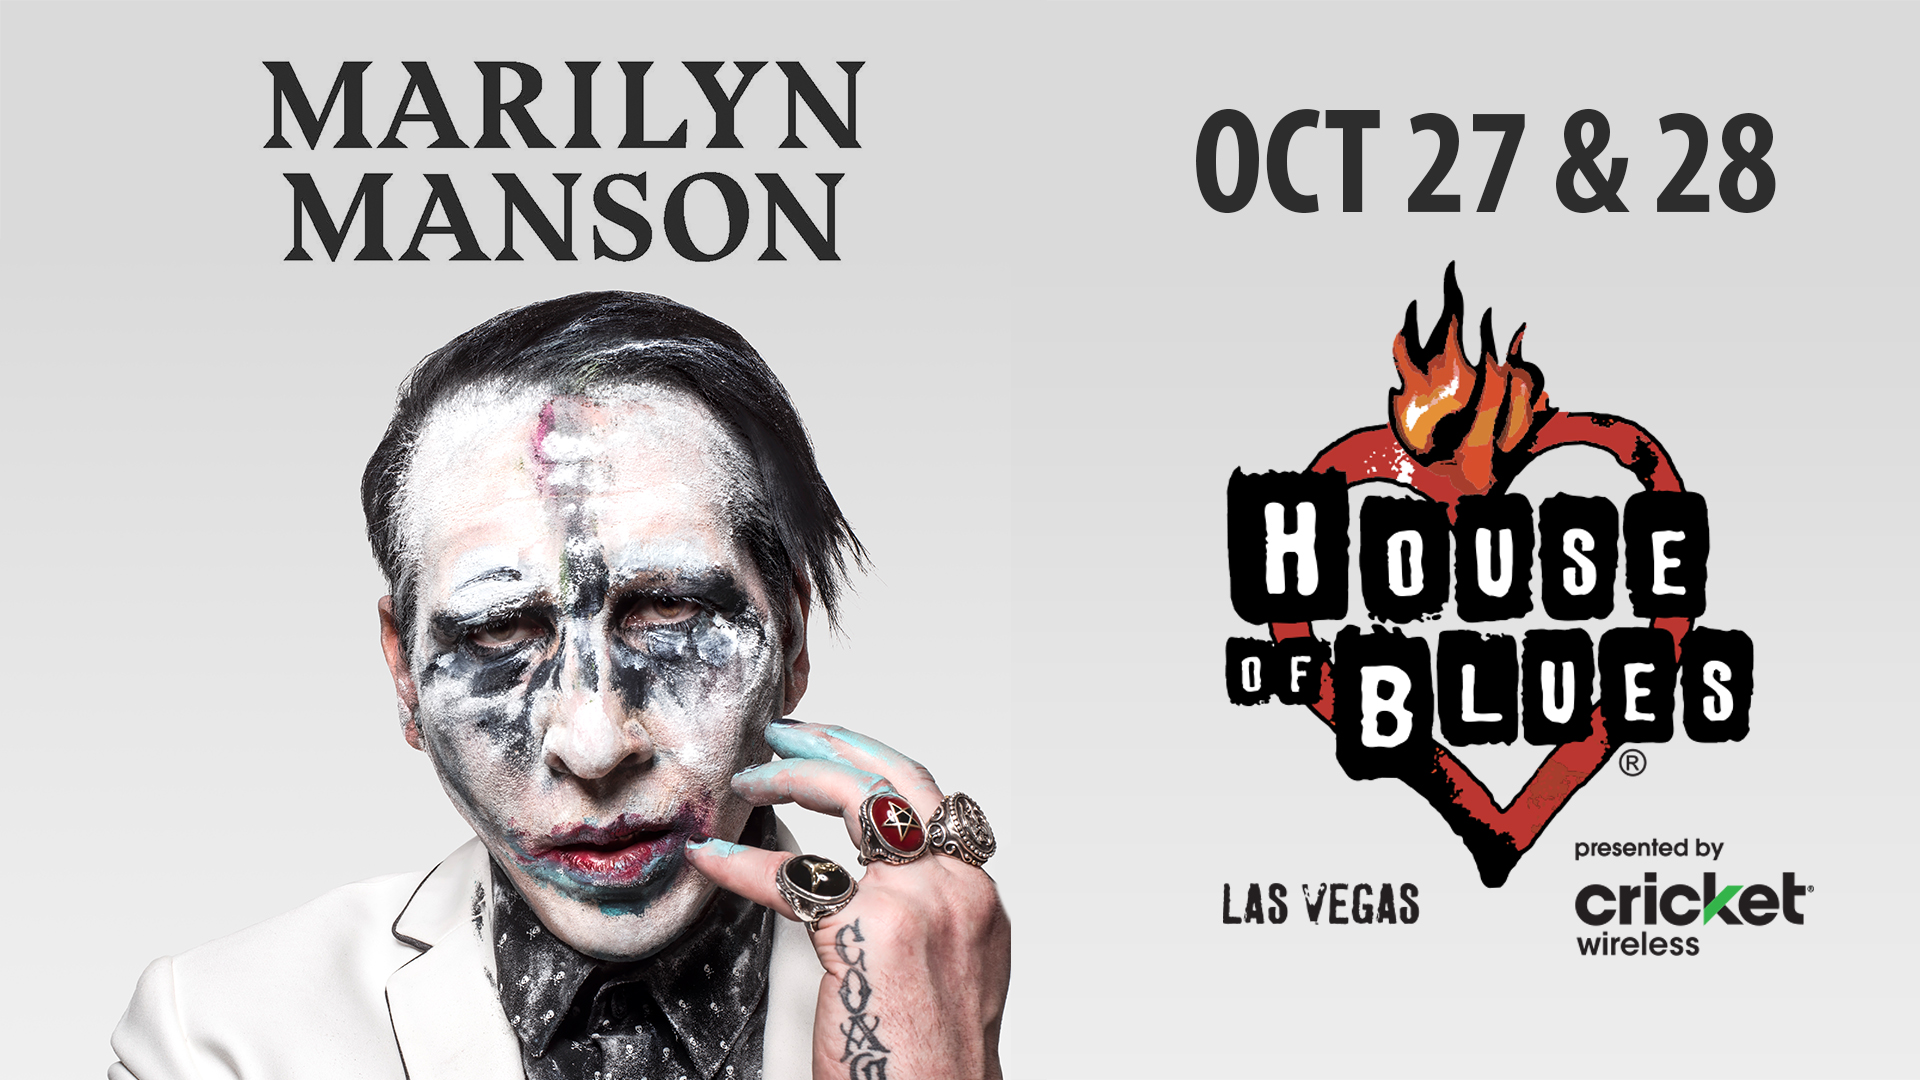 MARILYN MANSON IS BRINGING HEAVEN UPSIDE DOWN TO TOWN AND WE HAVE TICKETS!  ENTER NOW!